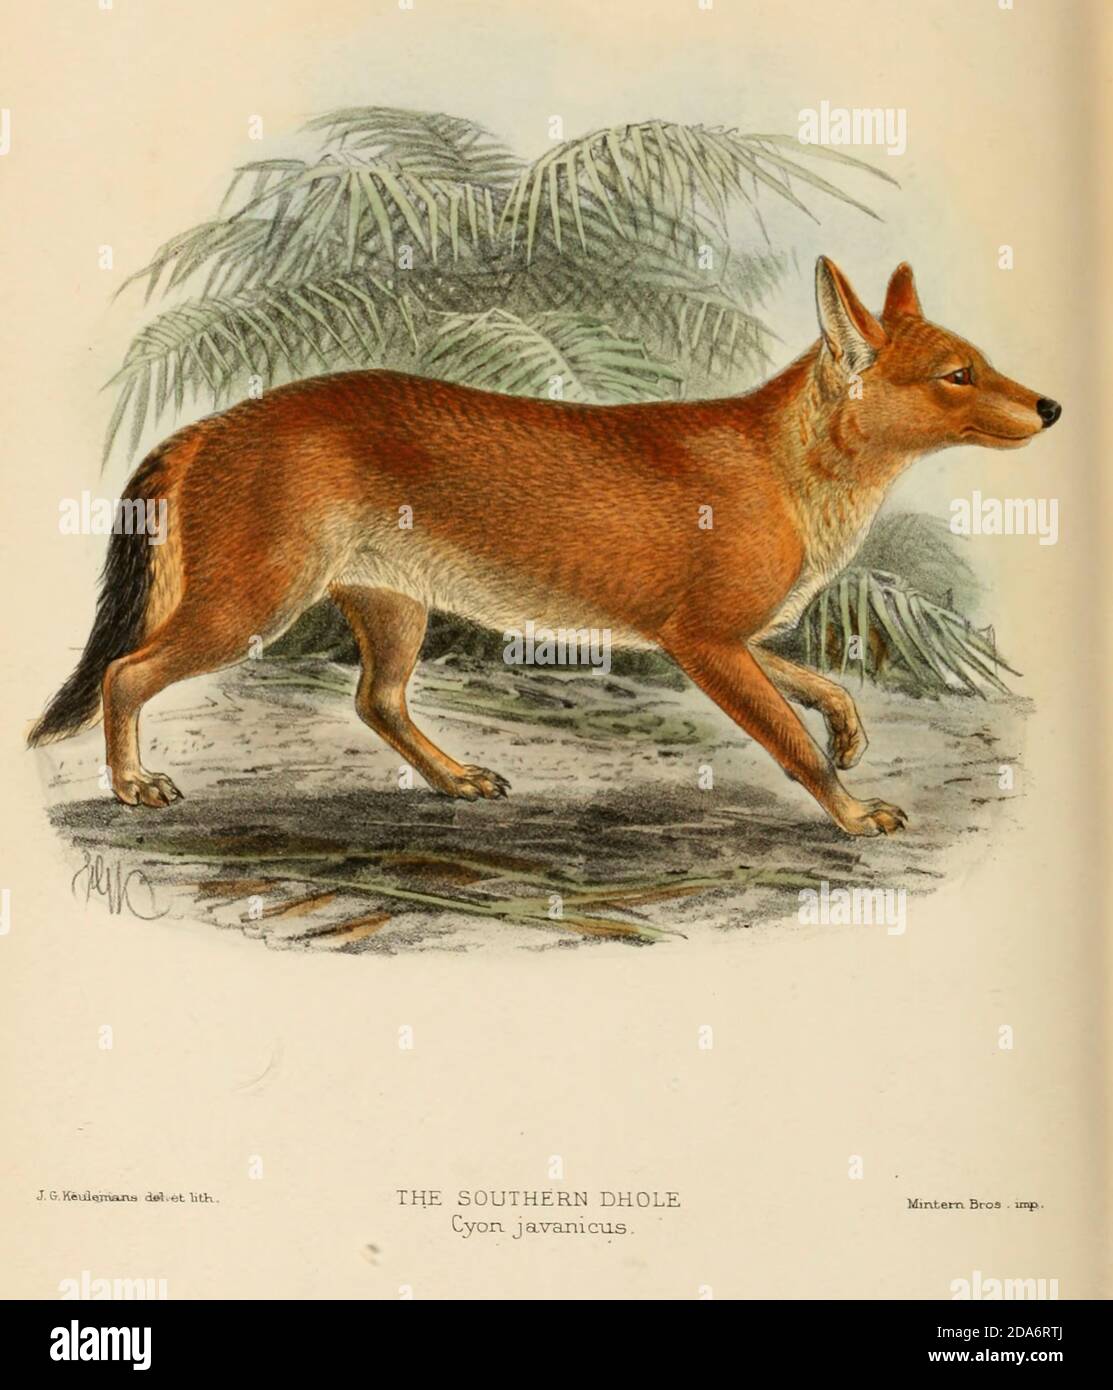 The Ussuri dhole (Cuon alpinus alpinus [Cyon javanicus]), also known as the Indian dhole, Eastern Asiatic dhole, Chinese dhole or Southern dhole, From the Book Dogs, Jackals, Wolves and Foxes A Monograph of The Canidae [from Latin, canis, 'dog') is a biological family of dog-like carnivorans. A member of this family is called a canid] By George Mivart, F.R.S. with woodcuts and 45 coloured plates drawn from nature by J. G. Keulemans and Hand-Coloured. Published by R. H. Porter, London, 1890 Stock Photo